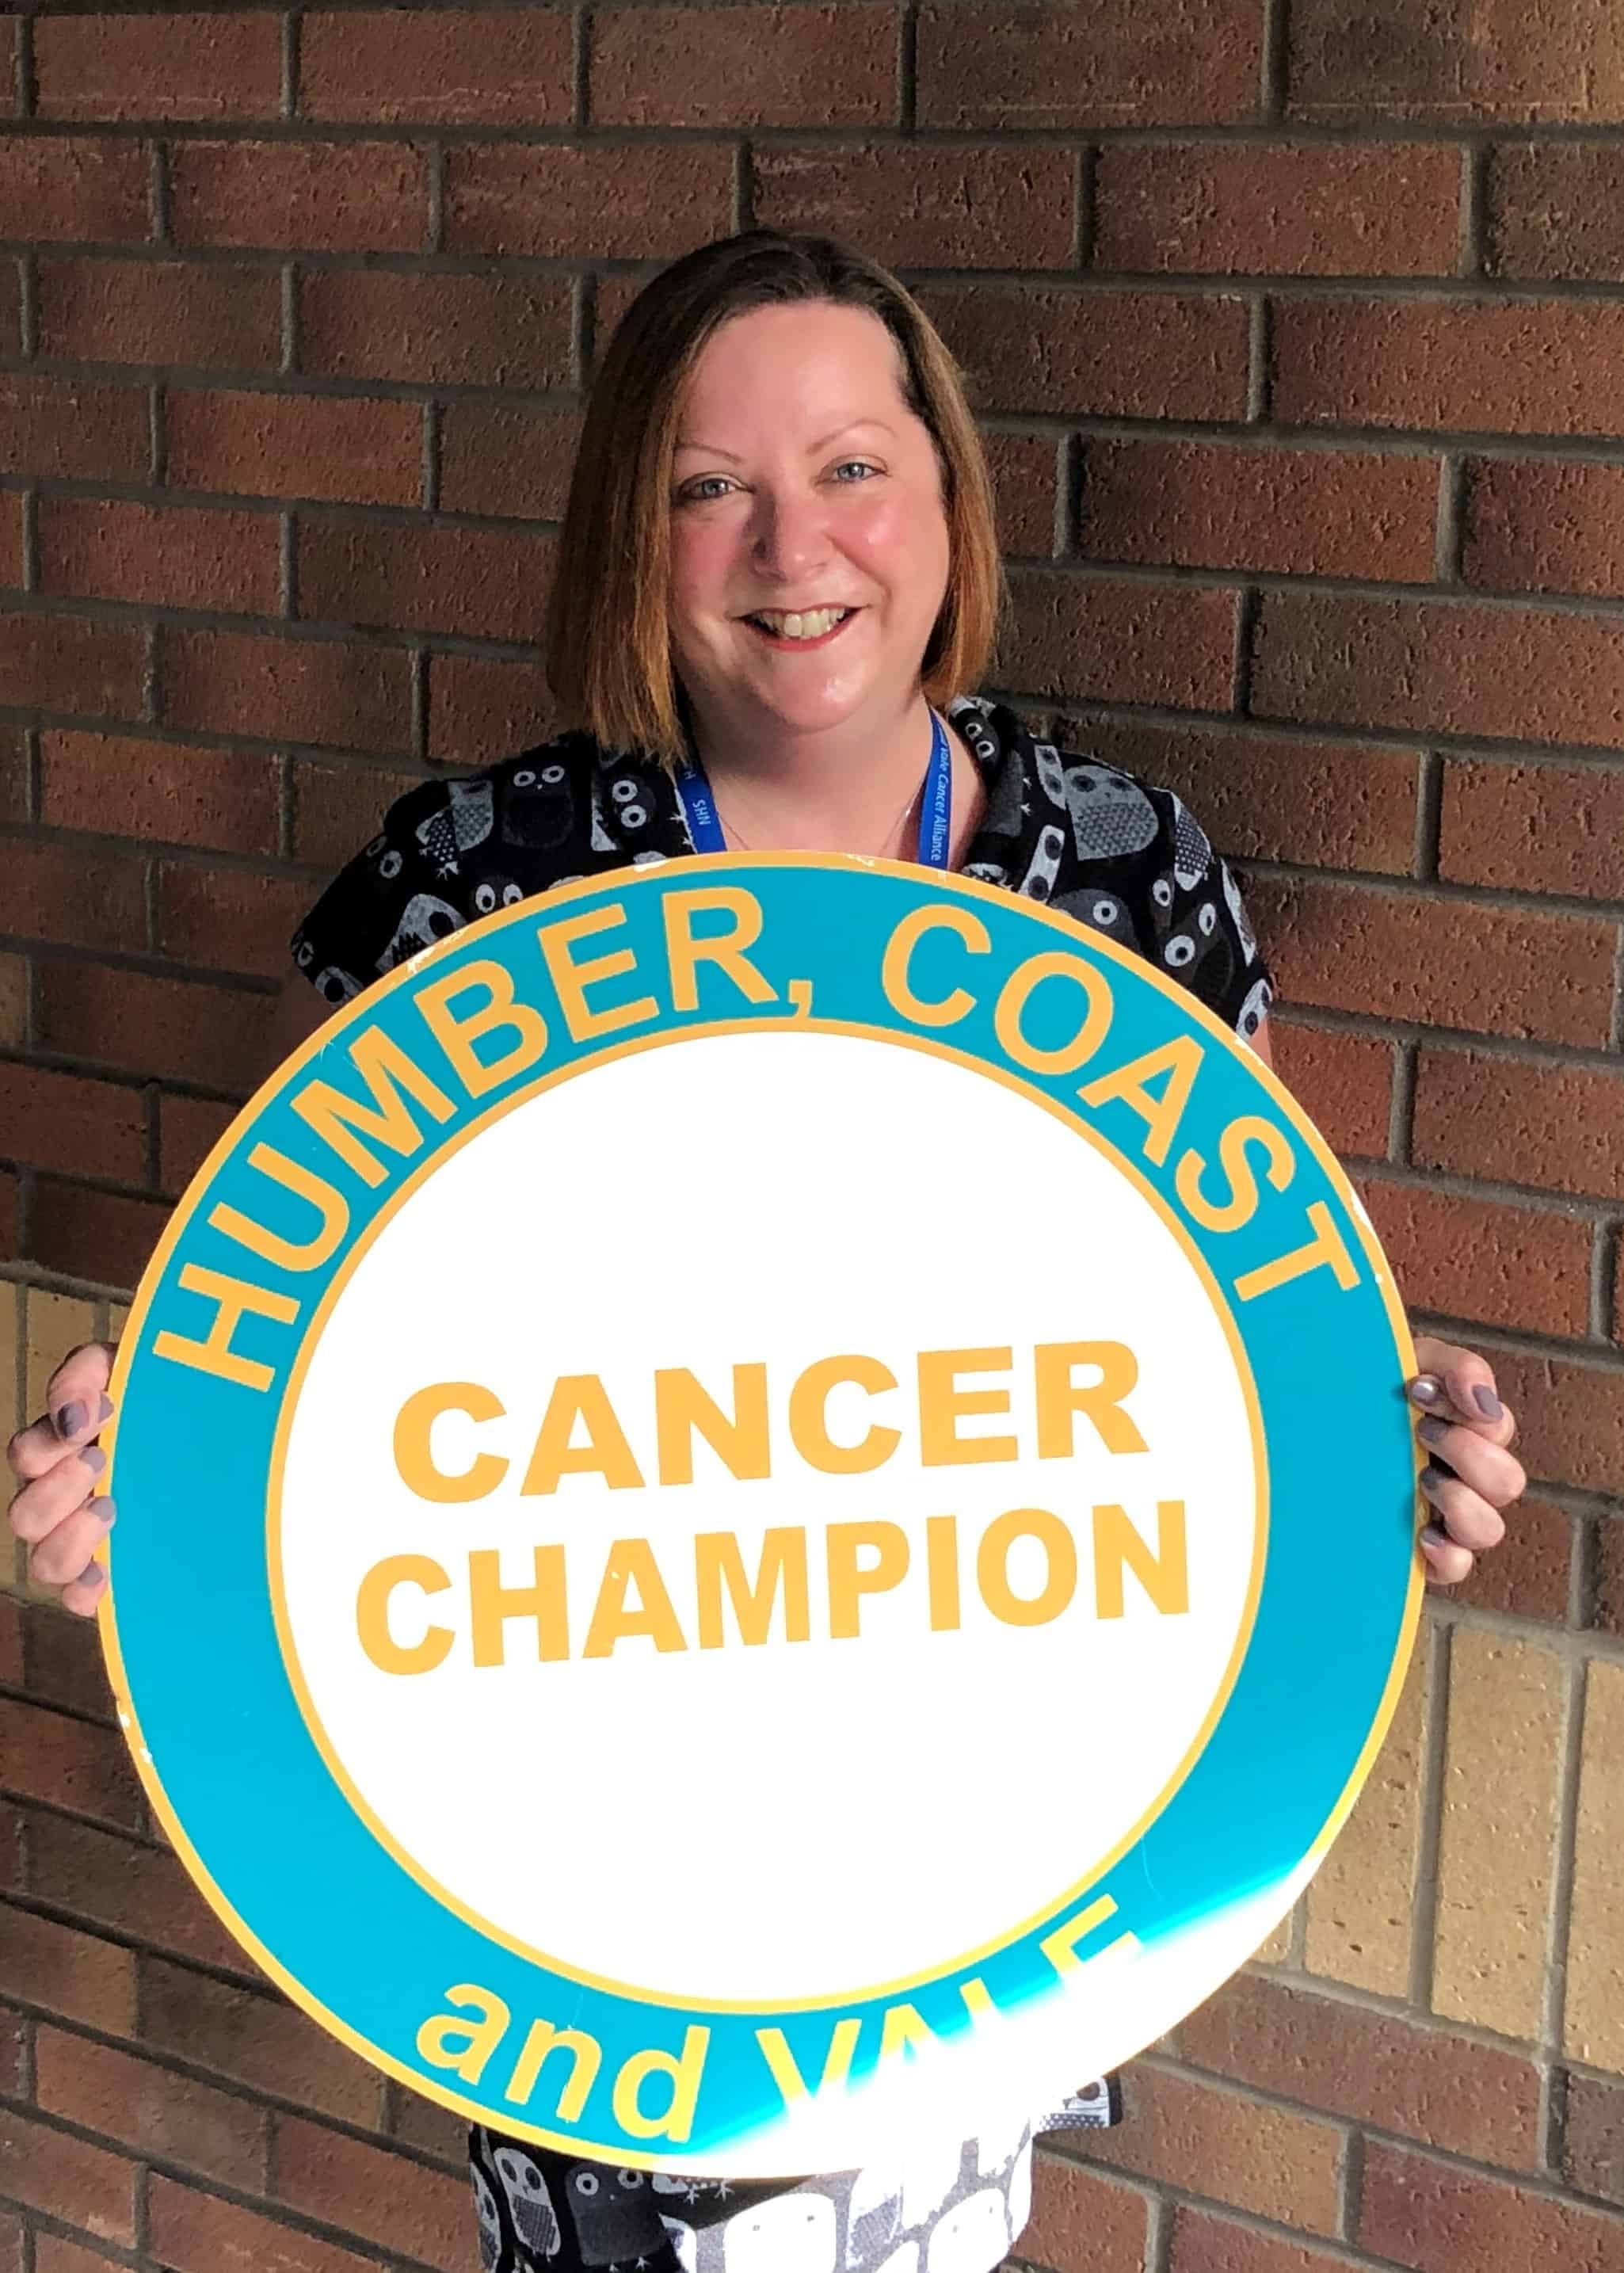 Photo of Zoe Bounds standing in front of a brick wall. Zoe is holding a photo prop of the Cancer Champion logo. Zoe is smiling and has shoulder length, dark, hair.